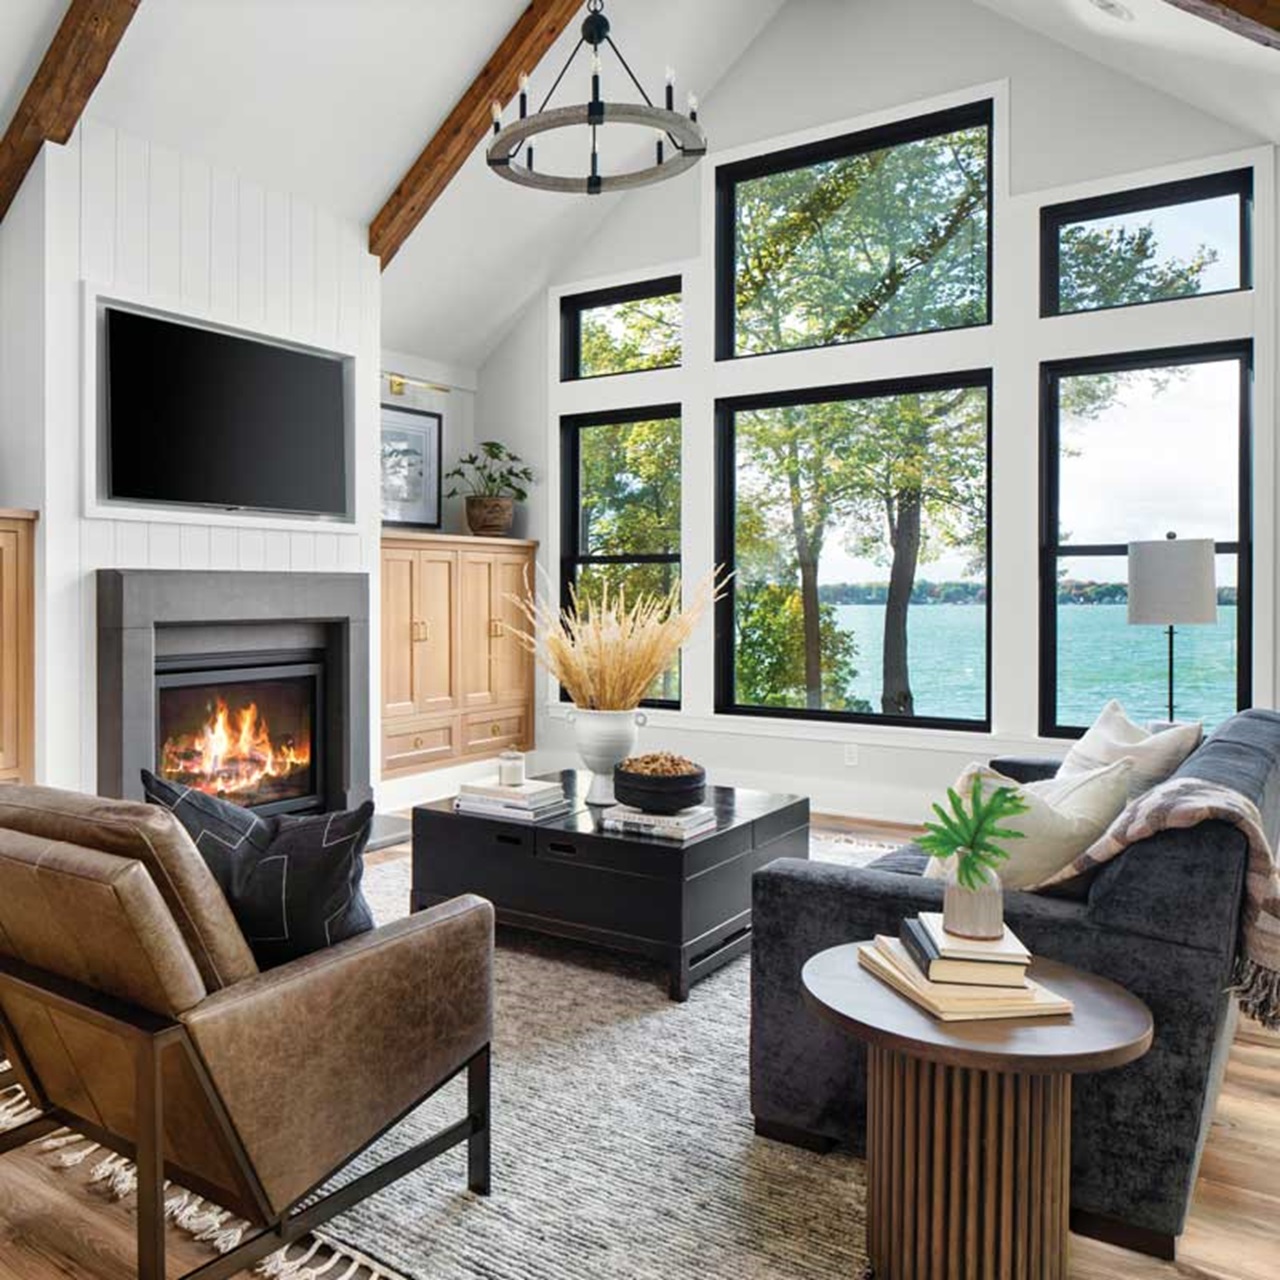 Living room with seating and fire place facing the view out black elevate windows